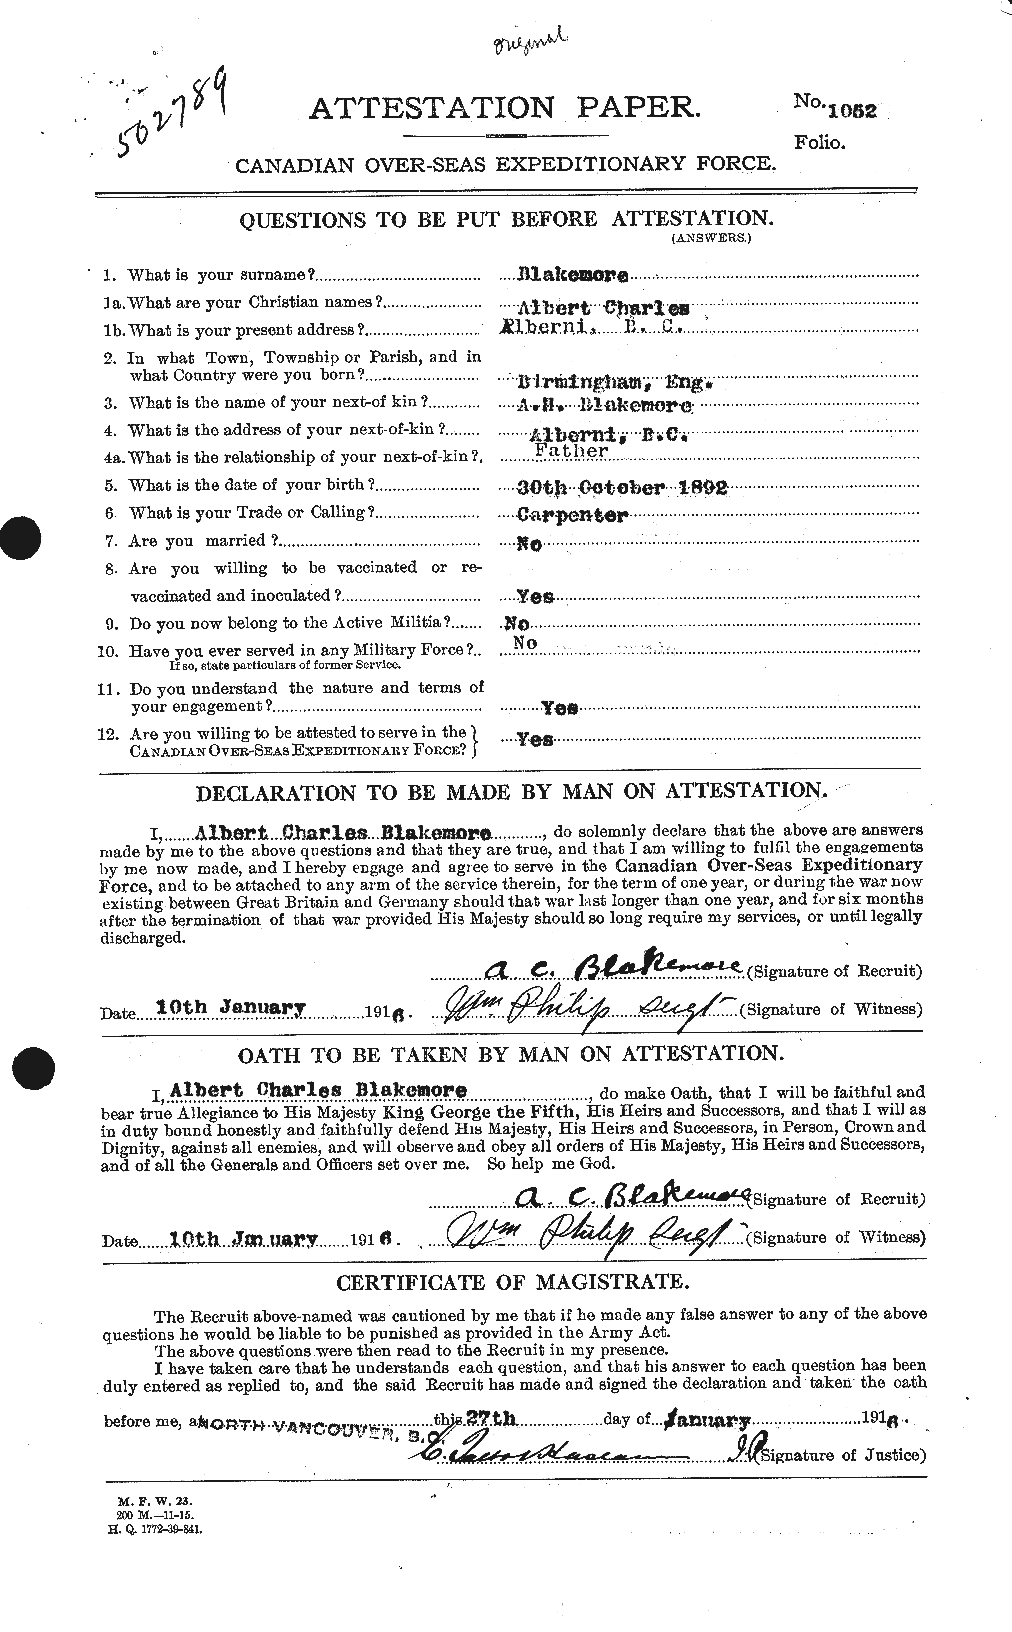 Personnel Records of the First World War - CEF 246692a